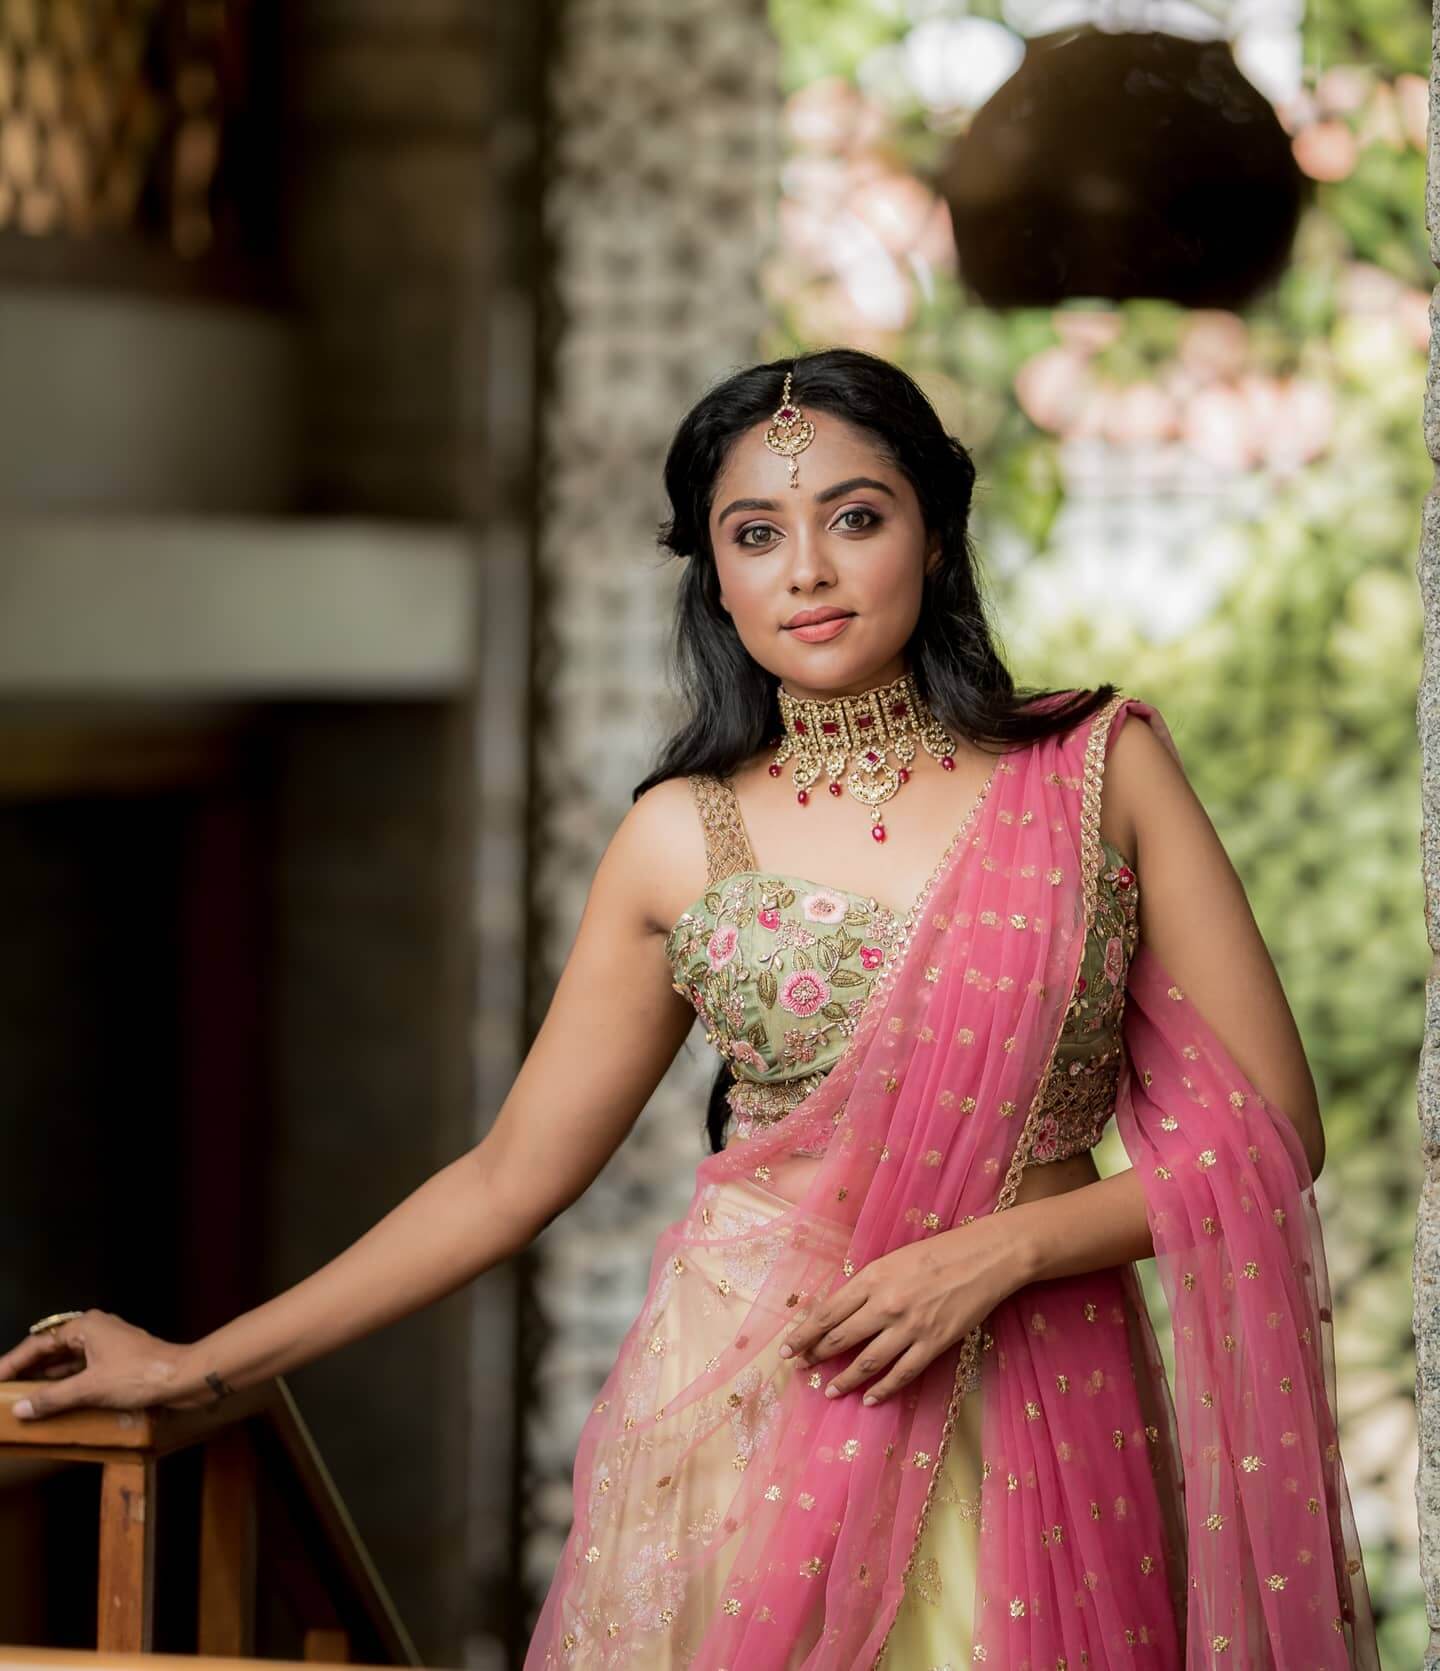 Smruthi Venkat Dreamy Look In Light Green Embroidered Lehenga With Pink Net Dupatta